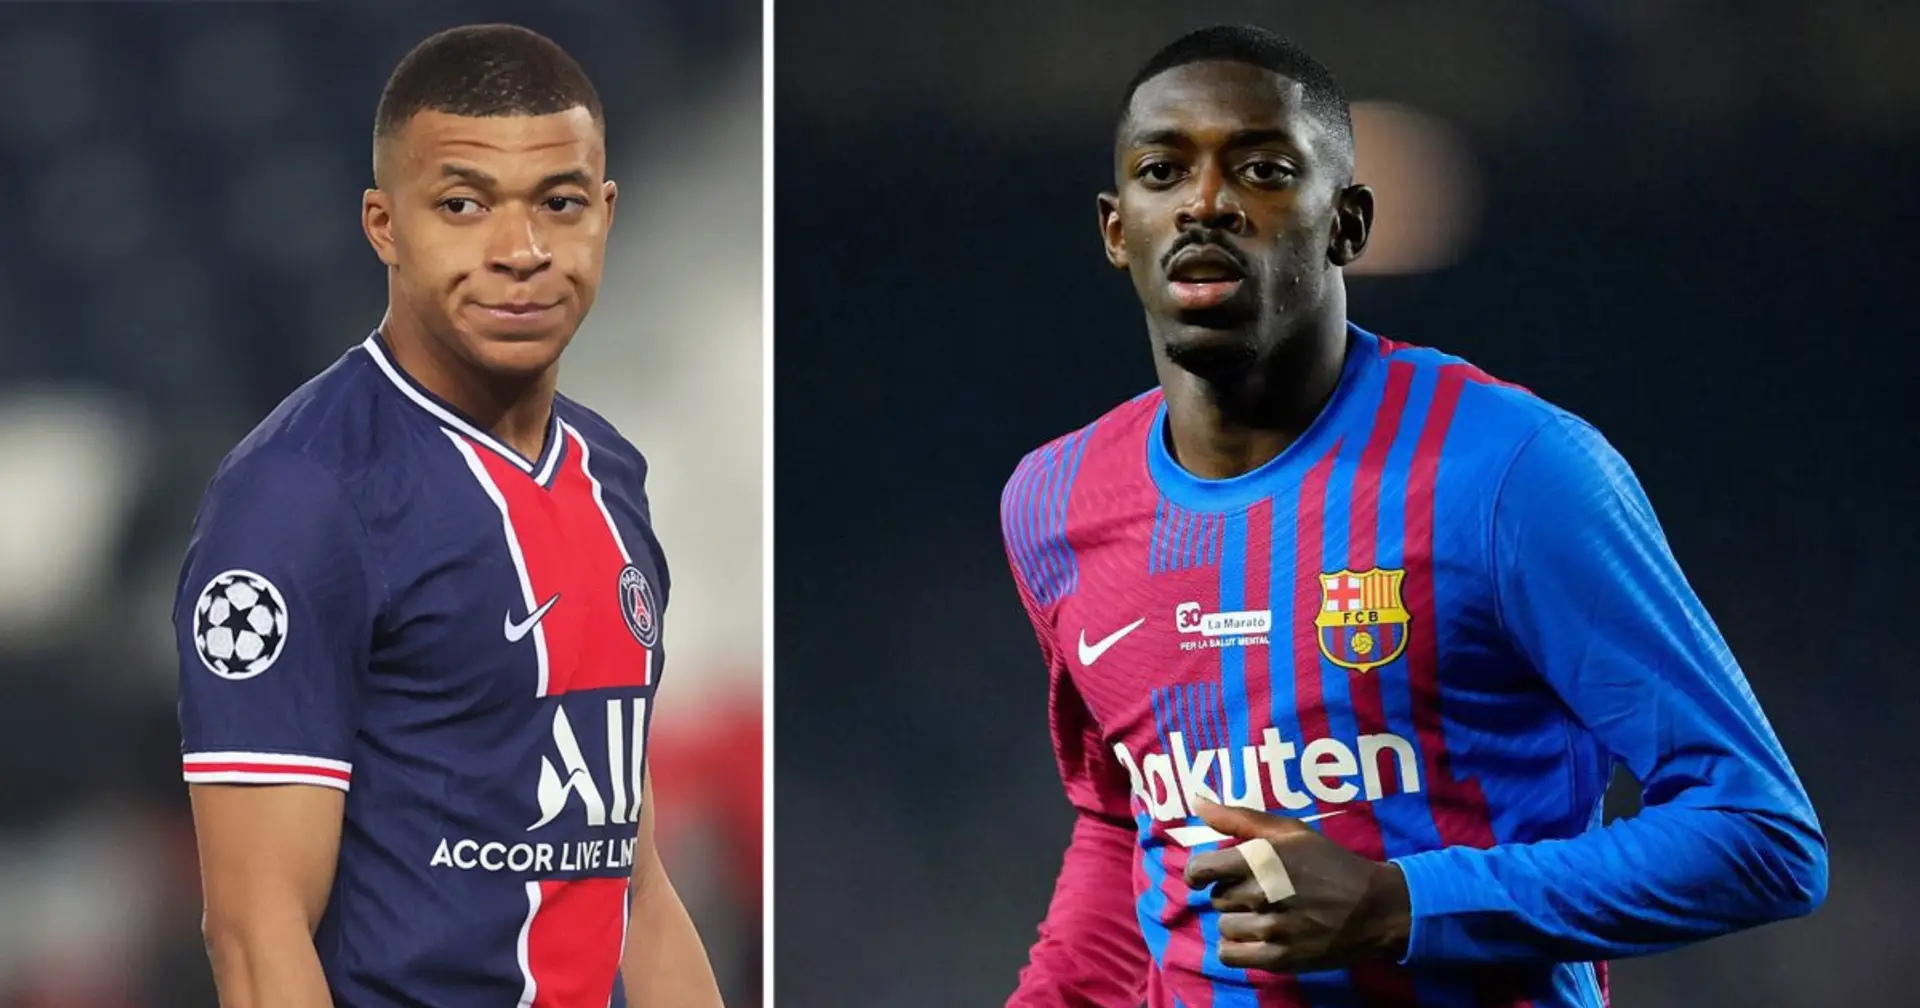 PSG target Dembele as possible replacement for Mbappe (reliability: 4 stars)